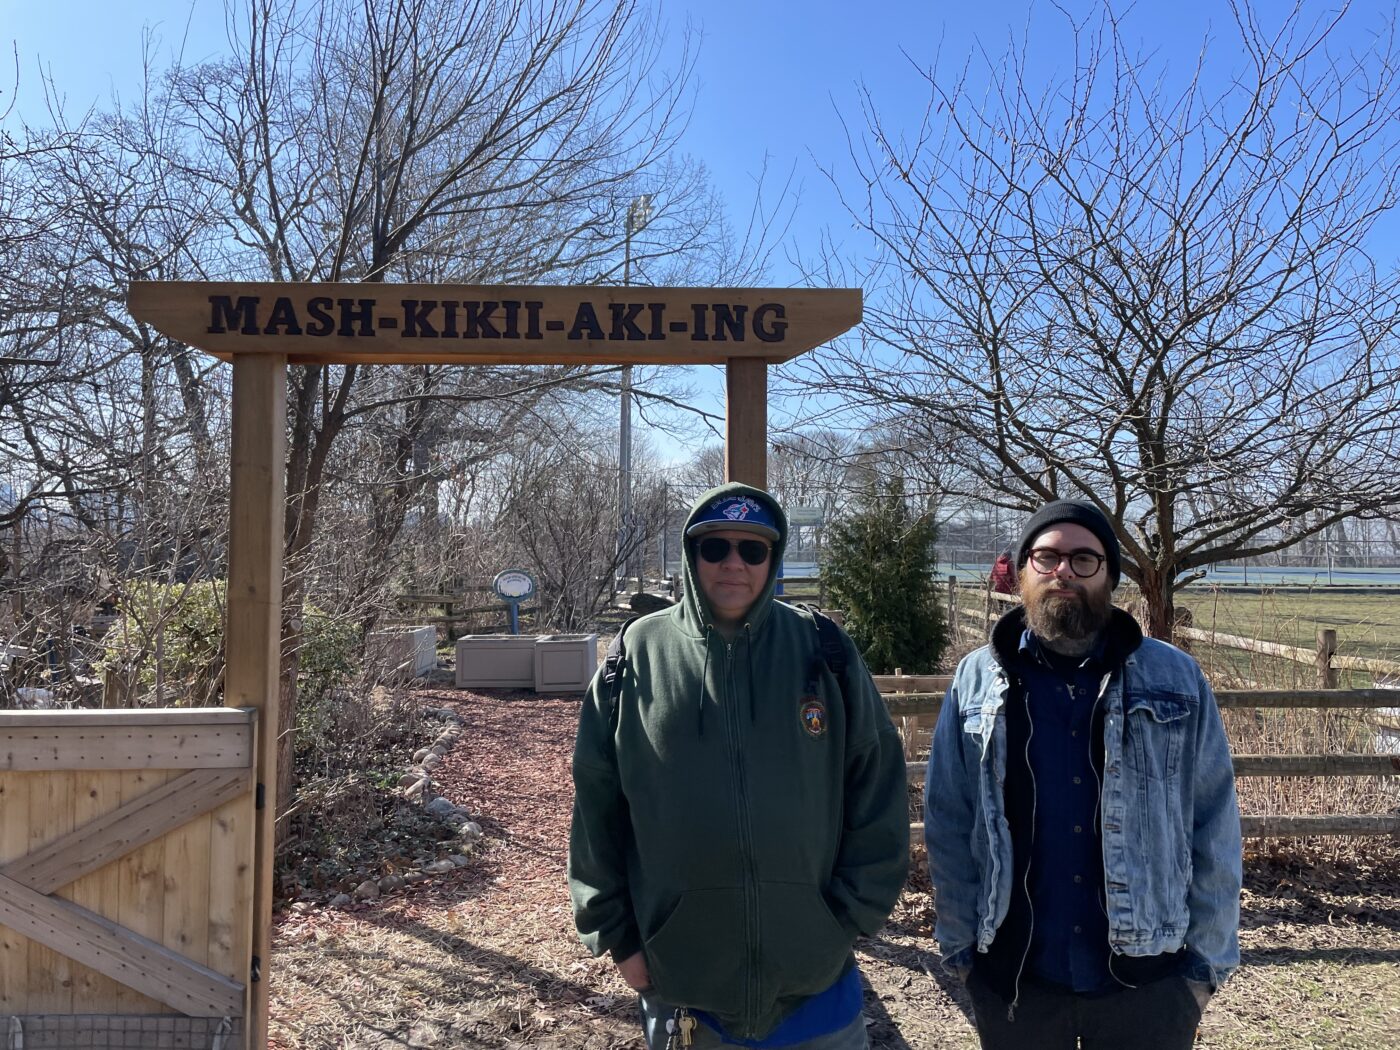 Big Thunder (pictured left) and Karl Cousineau (pictured right) stand in front of the Mashkikiiaki'ng garden in Hillcrest Park